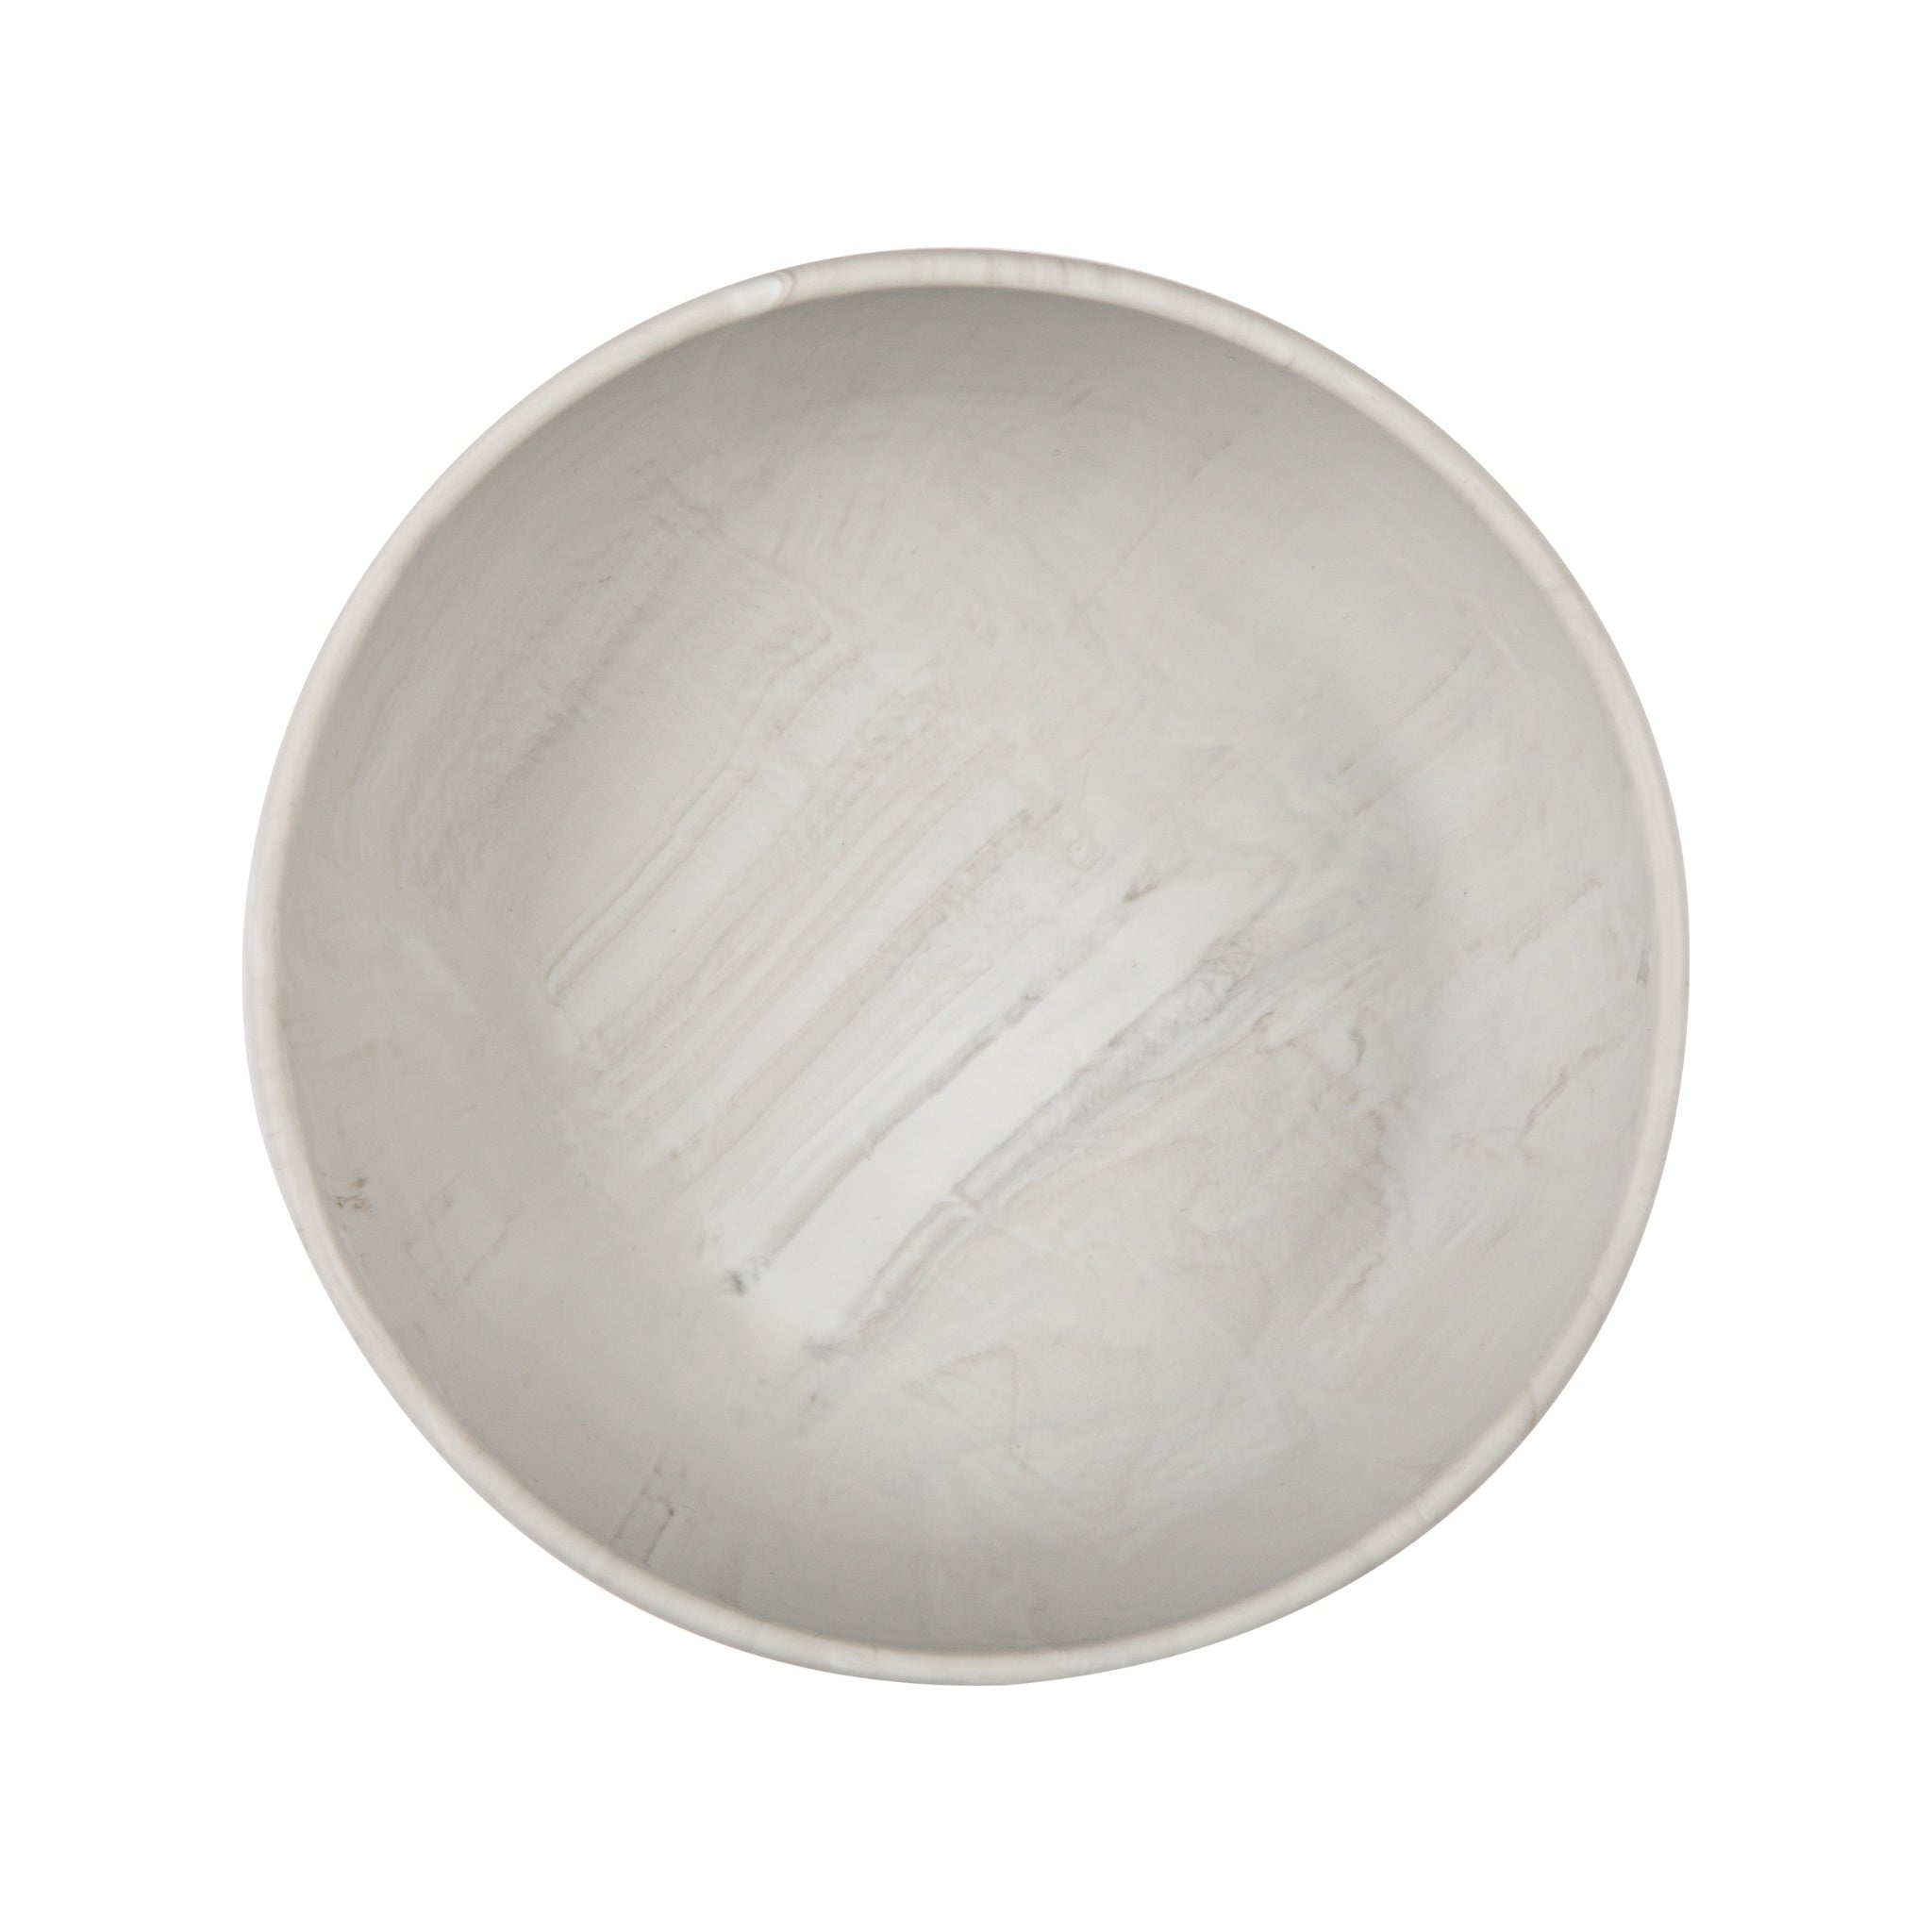 *eeveve* Silicone Bowl large シリコンボウル L - Marble - Cloudy Gray